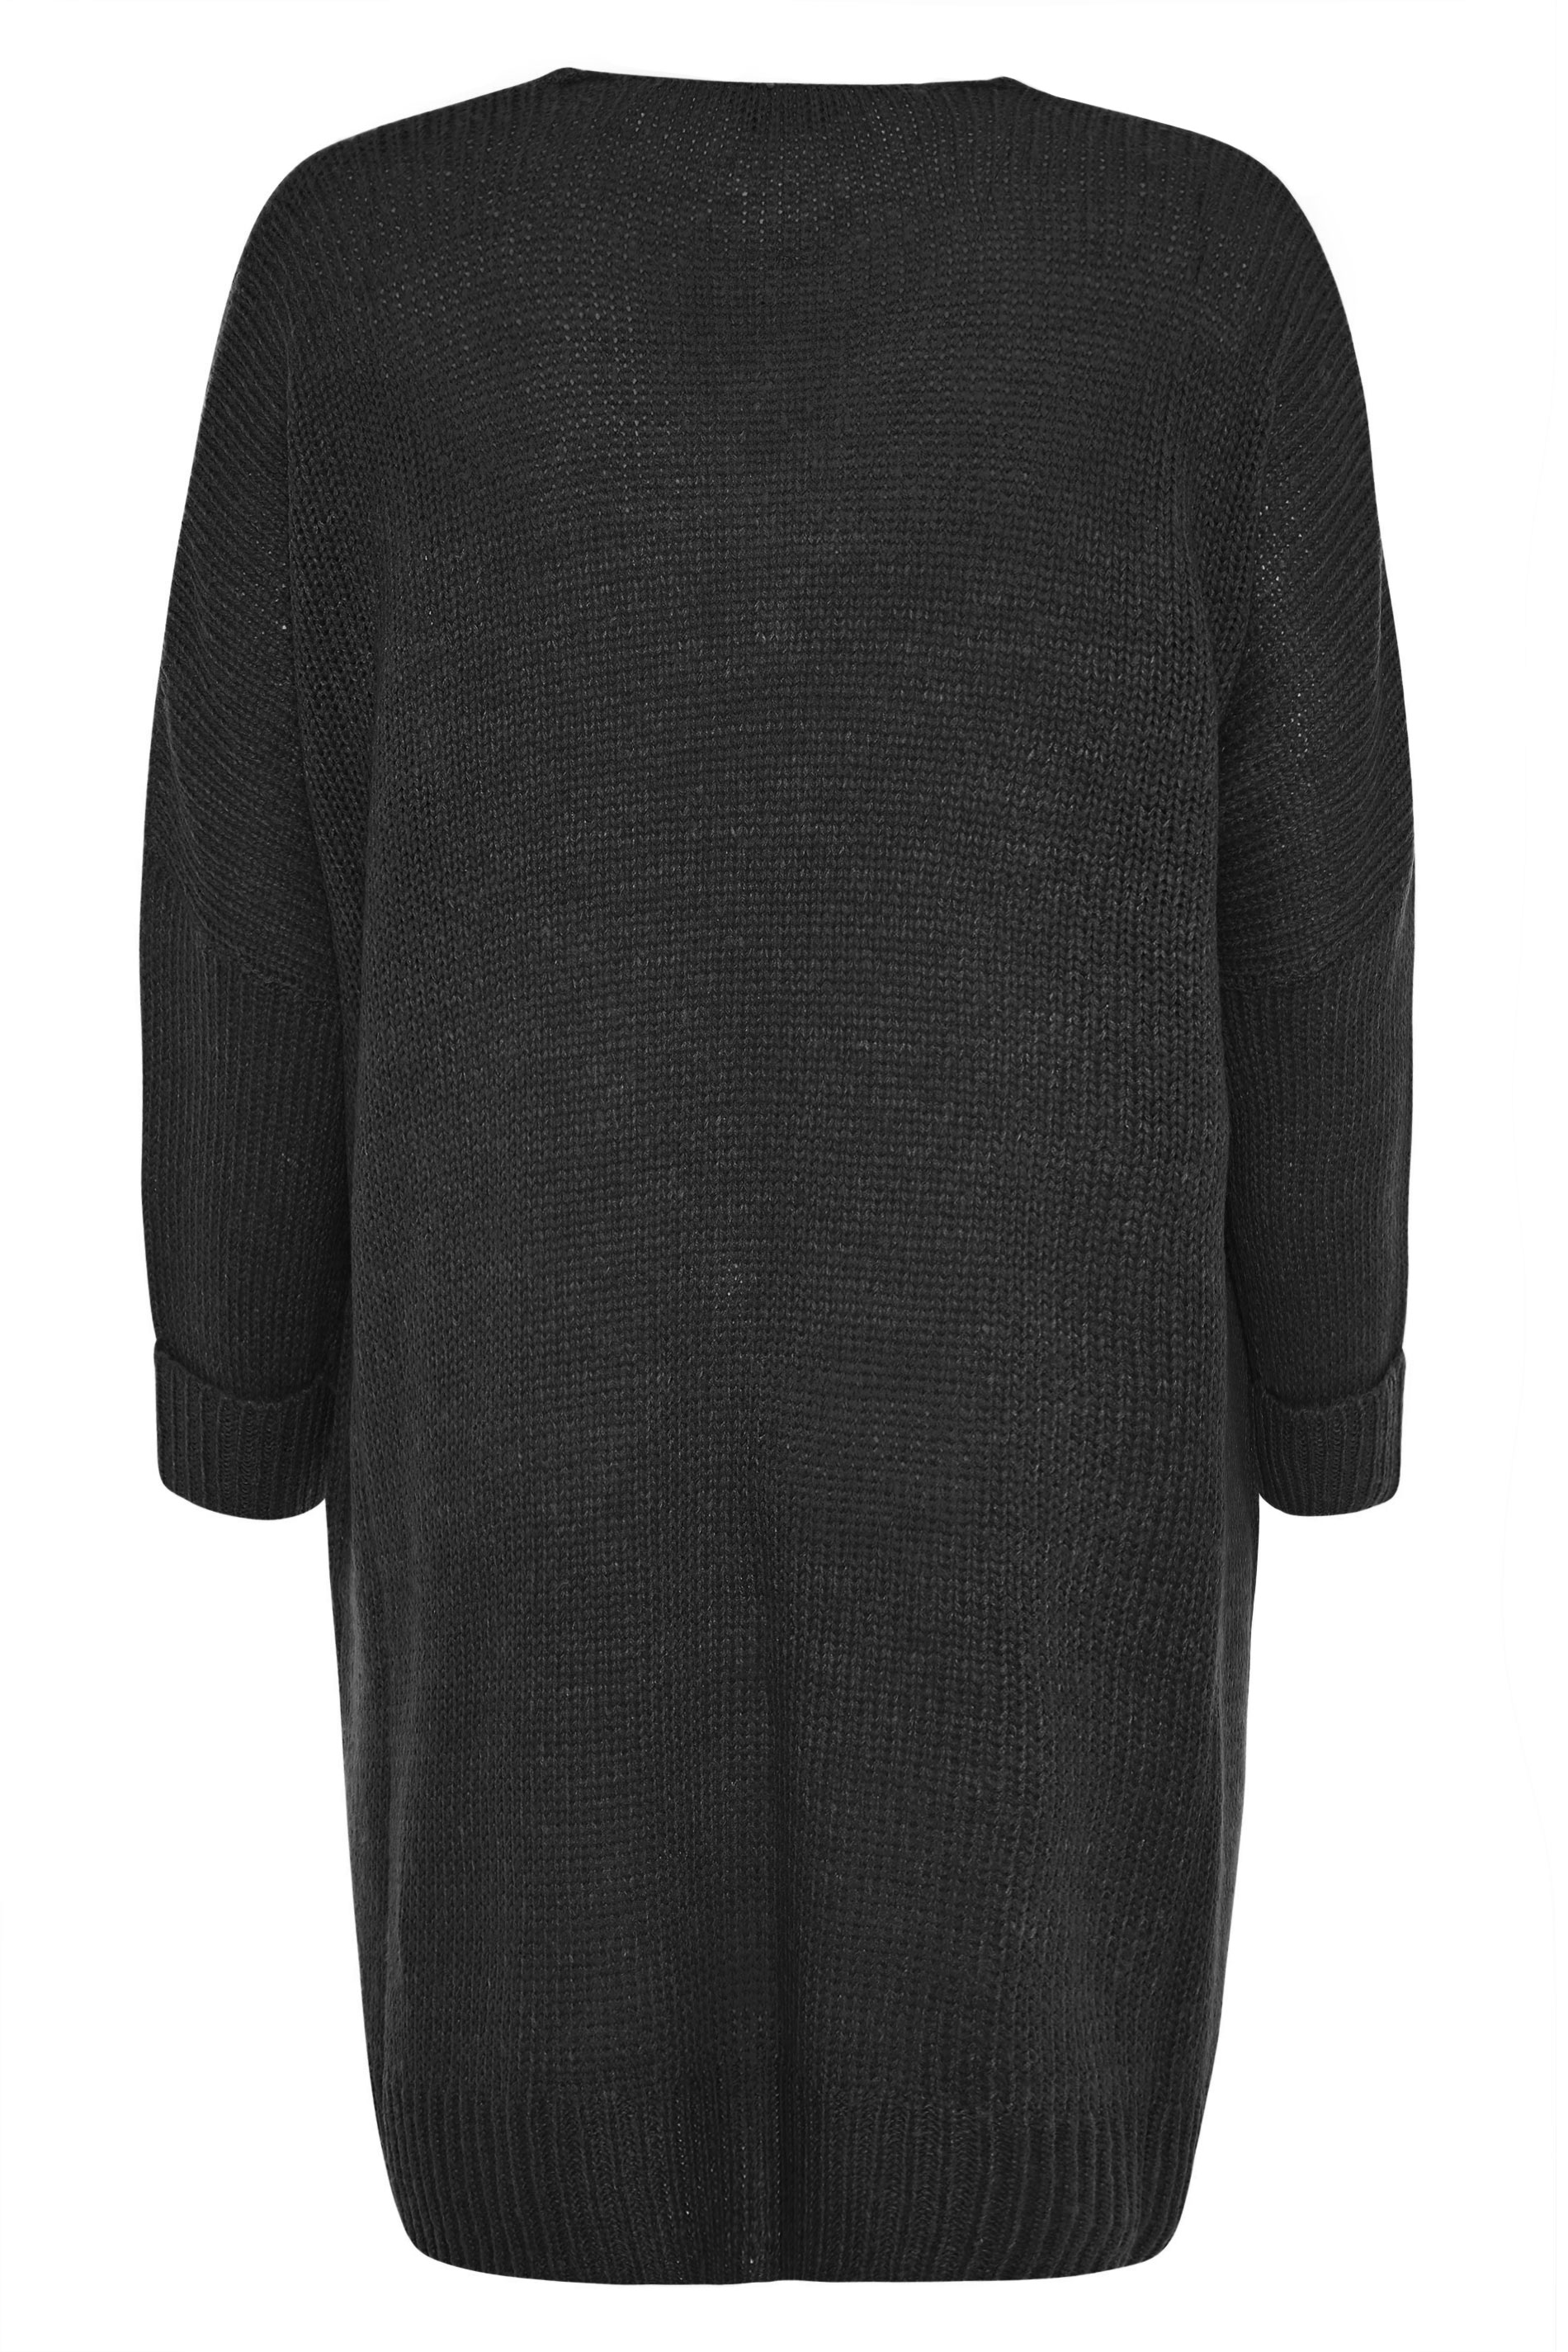 Plus Size Curve Black Drop Sleeve Knitted Jumper Dress | Yours Clothing